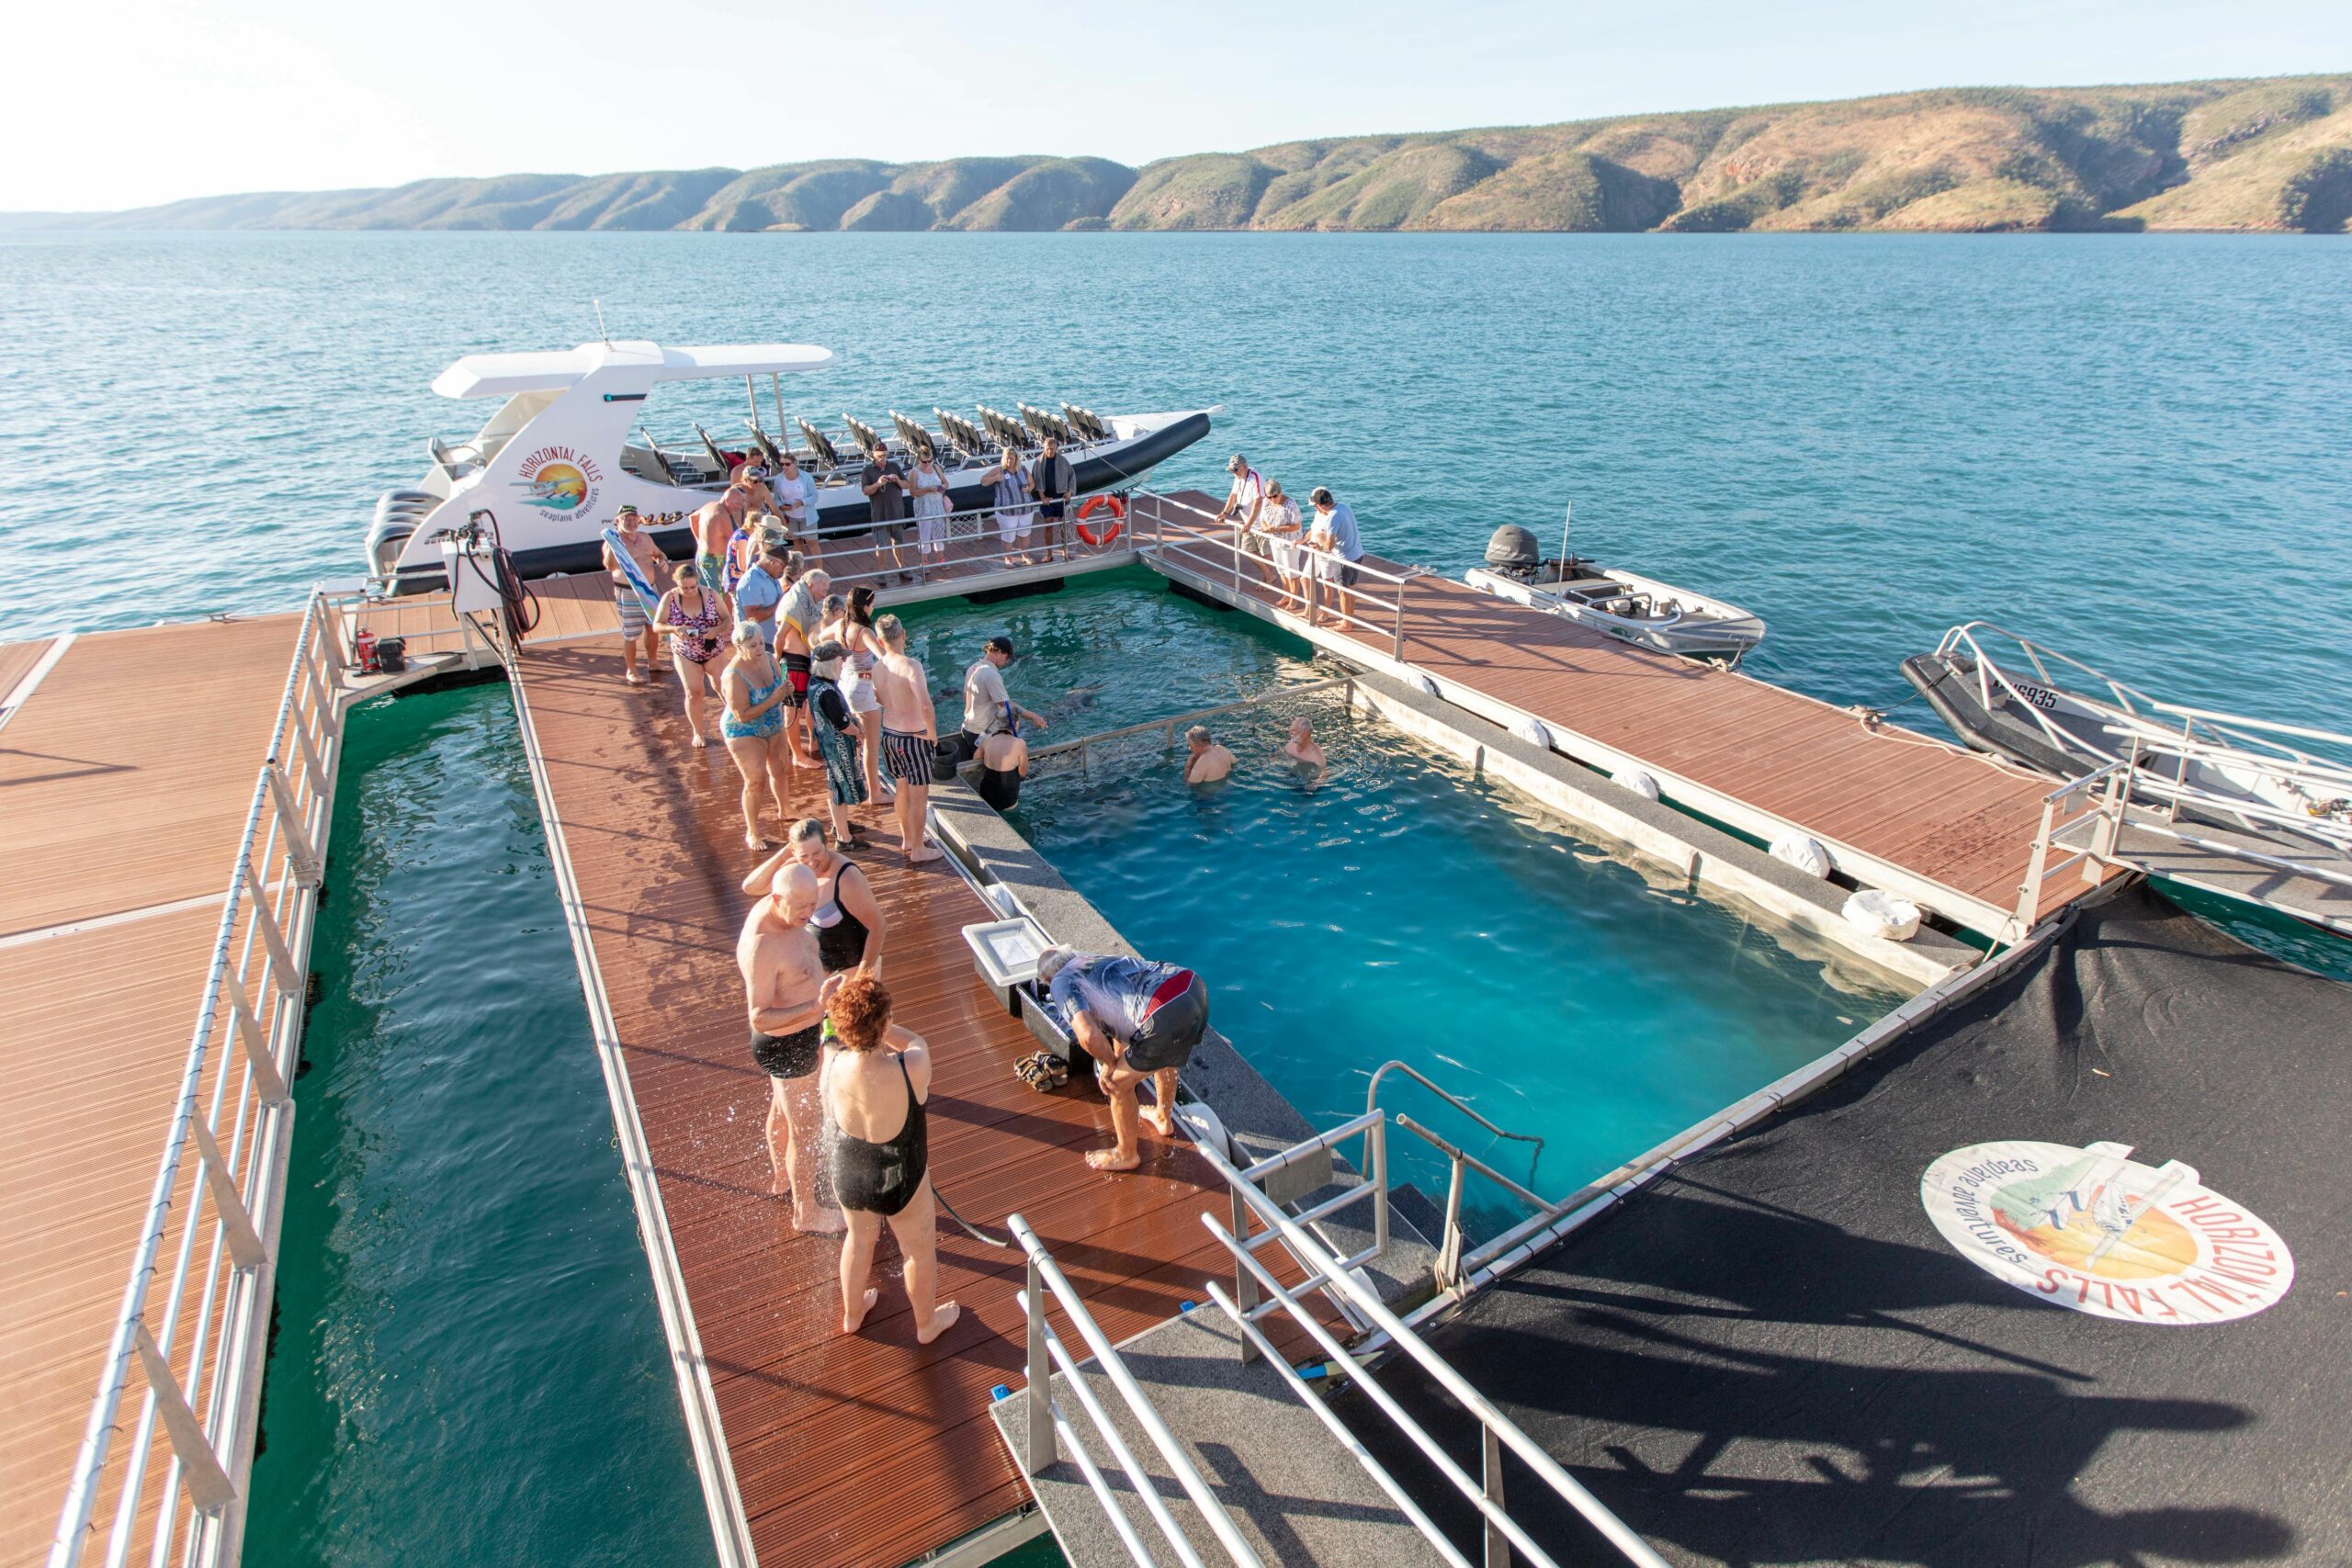 Horizontal Falls Discoverer (includes landing, boat tour & lunch) ex Broome